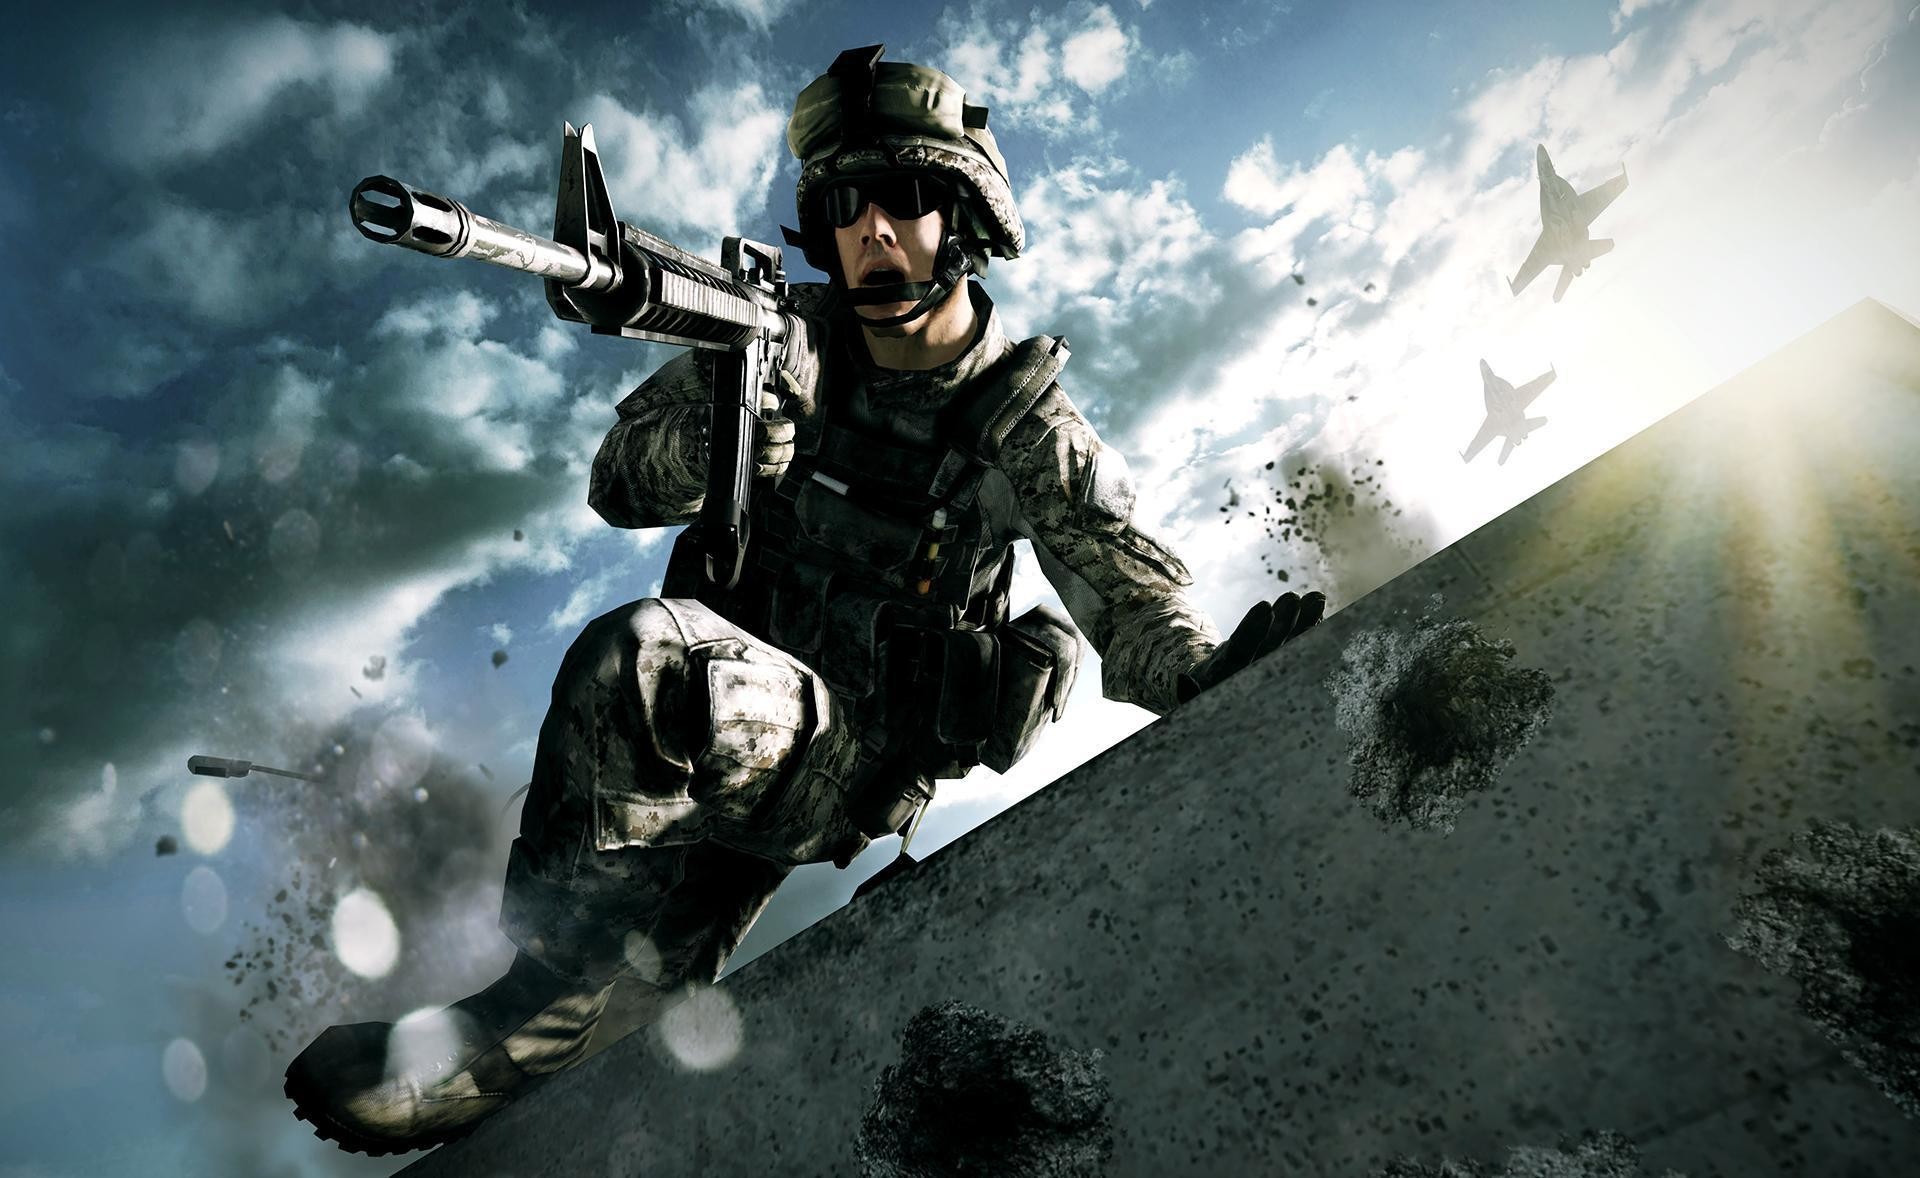 1920x1178 Cool Army Anction Android Wallpaper 7681 #2176 Wallpaper | High .